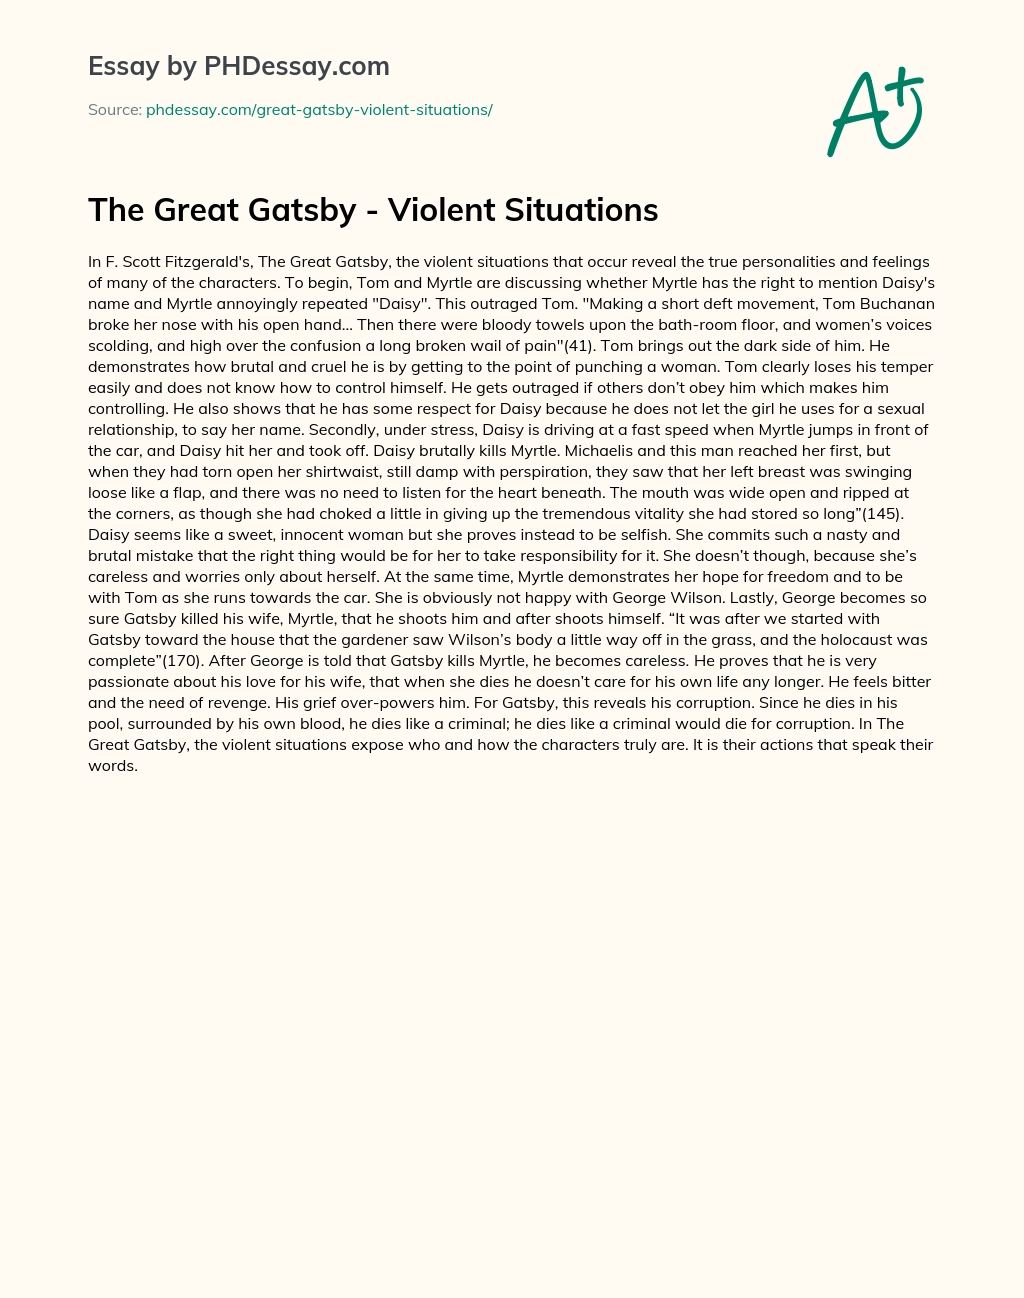 The Great Gatsby – Violent Situations essay